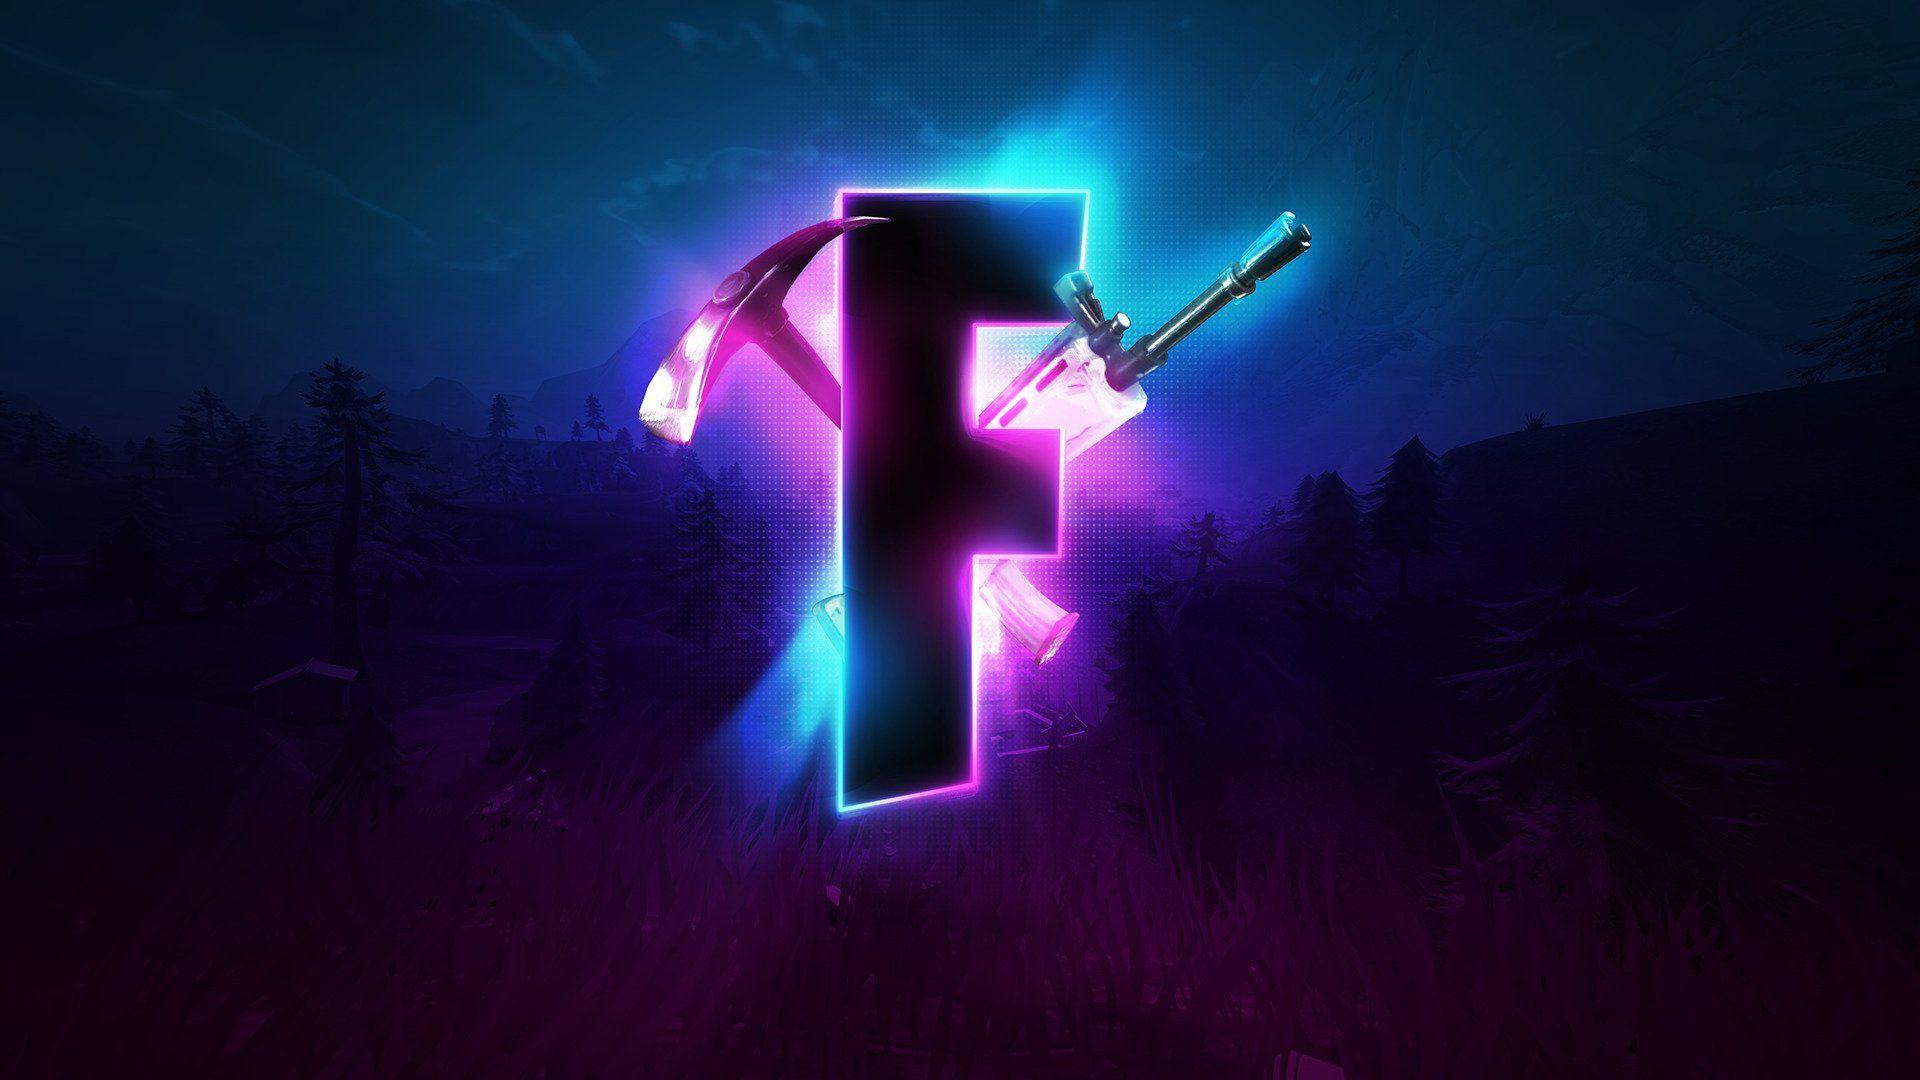 Fortnite F Logo - F stands for Fortnite by Noah Stephenson Wallpaper and Free